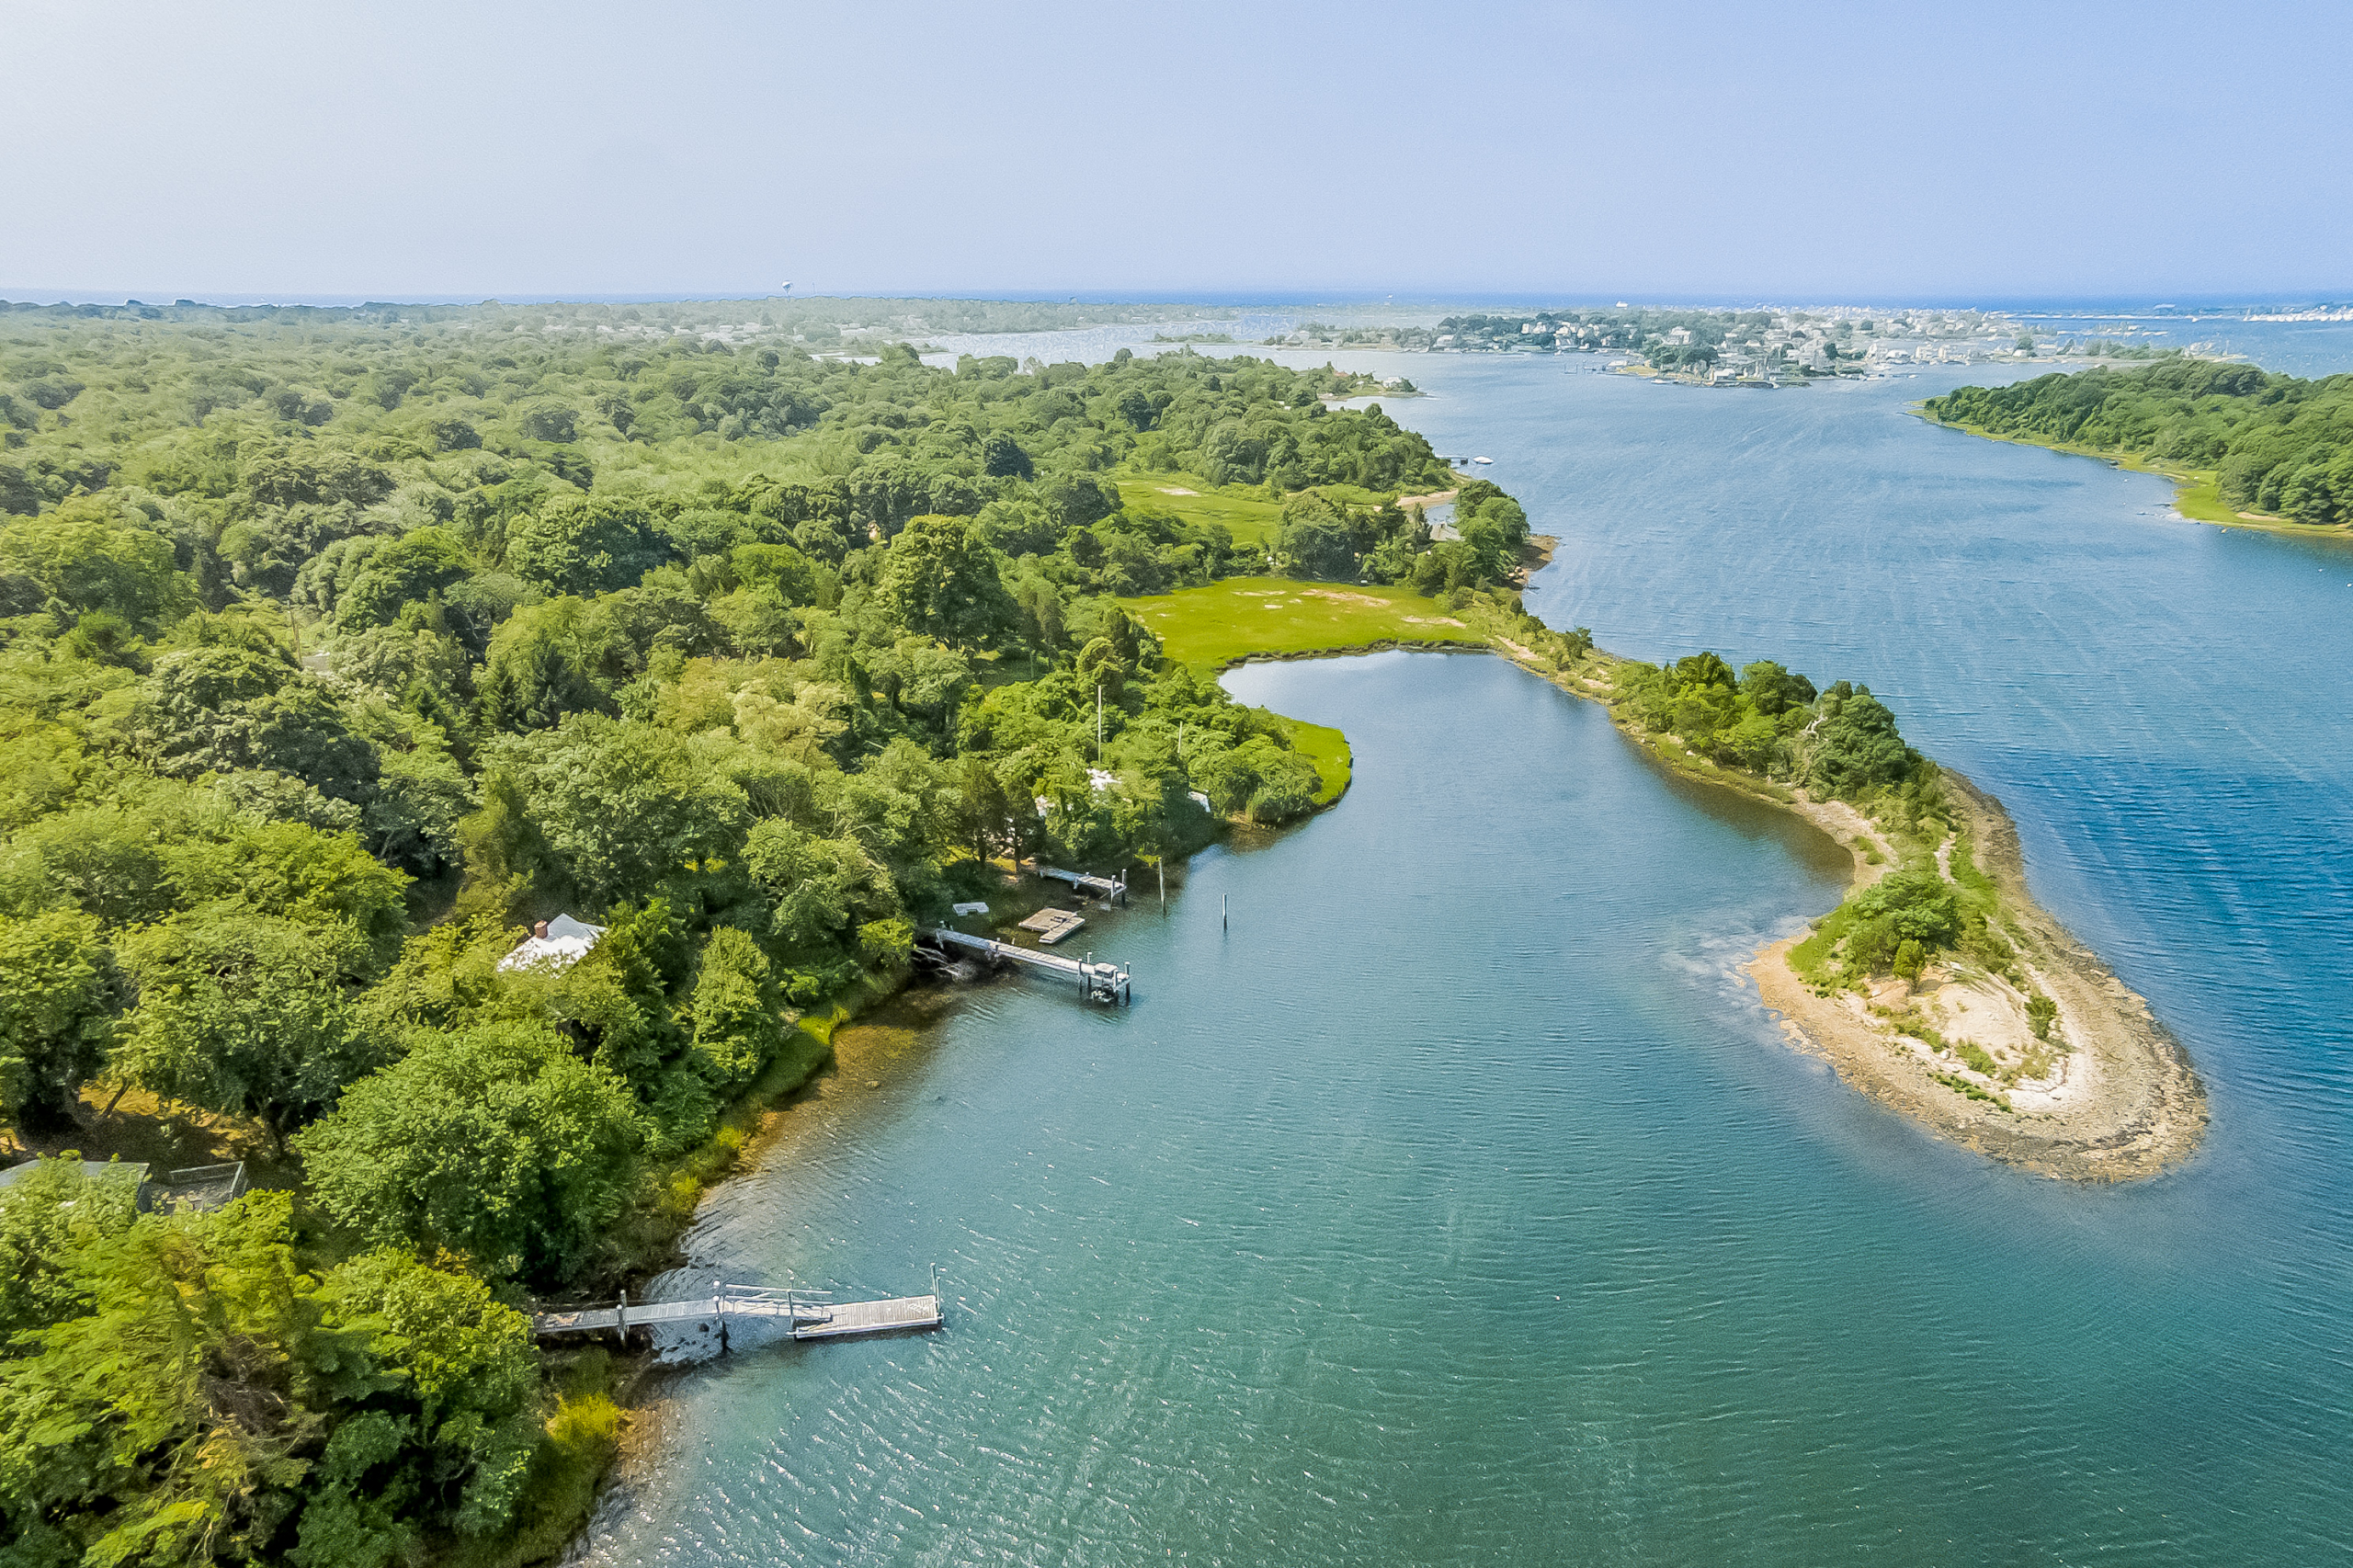 Lila Delman Compass sells 66 Acre Estate on Point Judith Pond for $4.1M, Marking the Highest Sale in Narragansett This Year